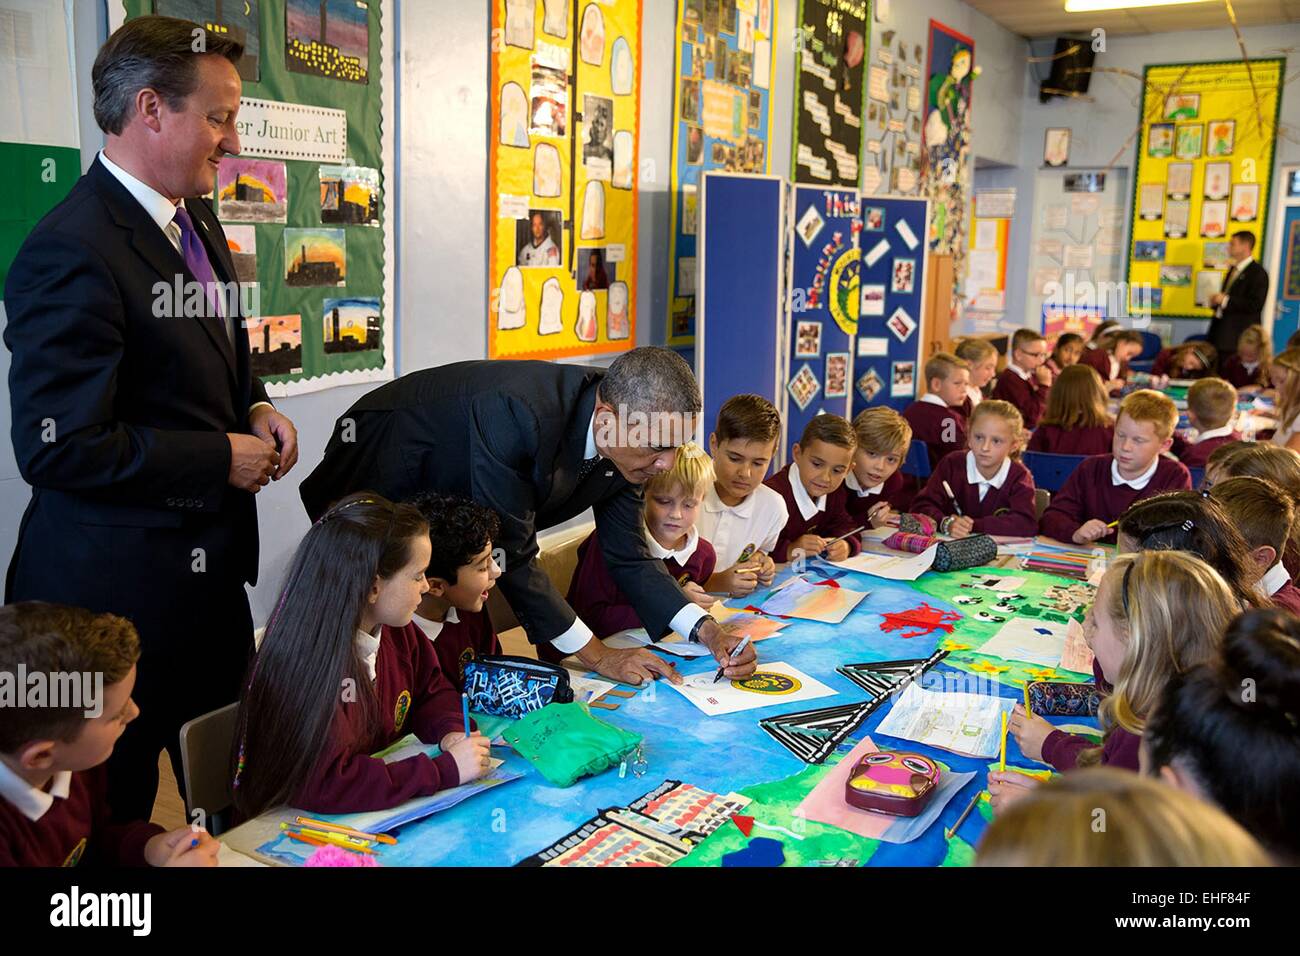 US President Barack Obama and Prime Minister David Cameron of the United Kingdom visit with students in a classroom at Mount Pleasant Primary School September 4, 2014 in Newport, Wales. Stock Photo